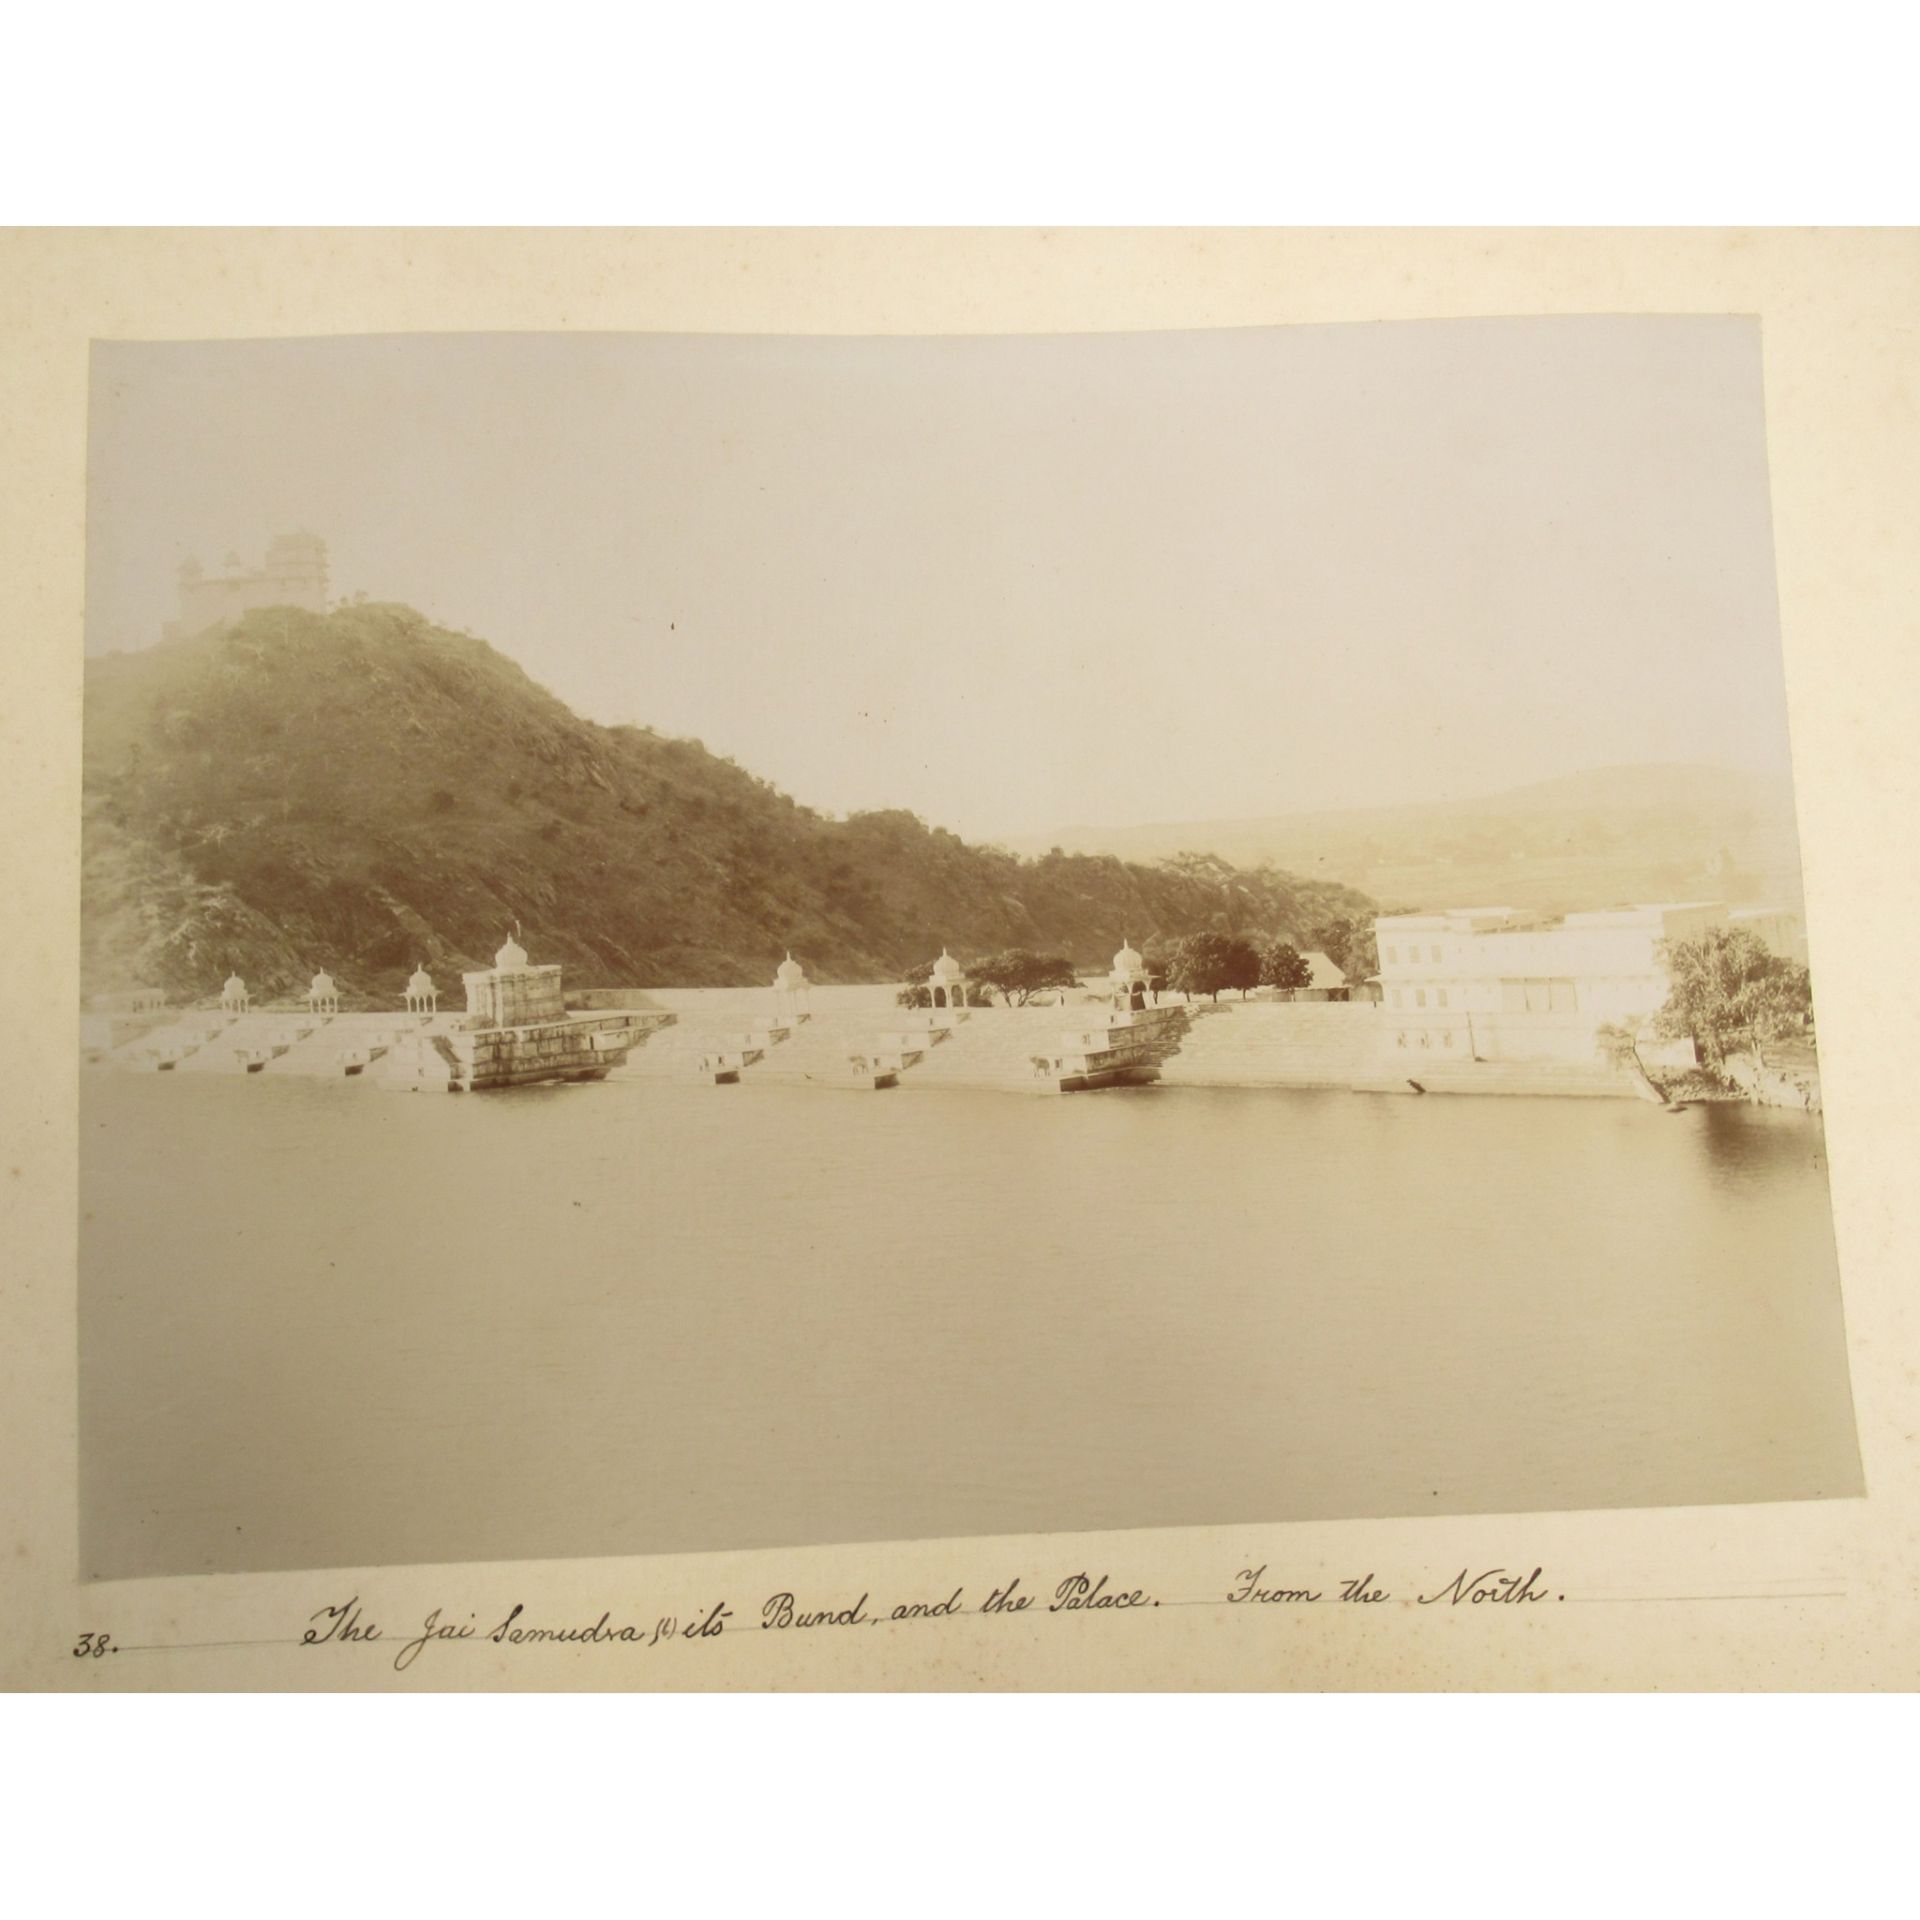 India: a photograph album Photographs of Rajasthan by Mohan Lal of Udaipur, late 19th century - Image 22 of 23